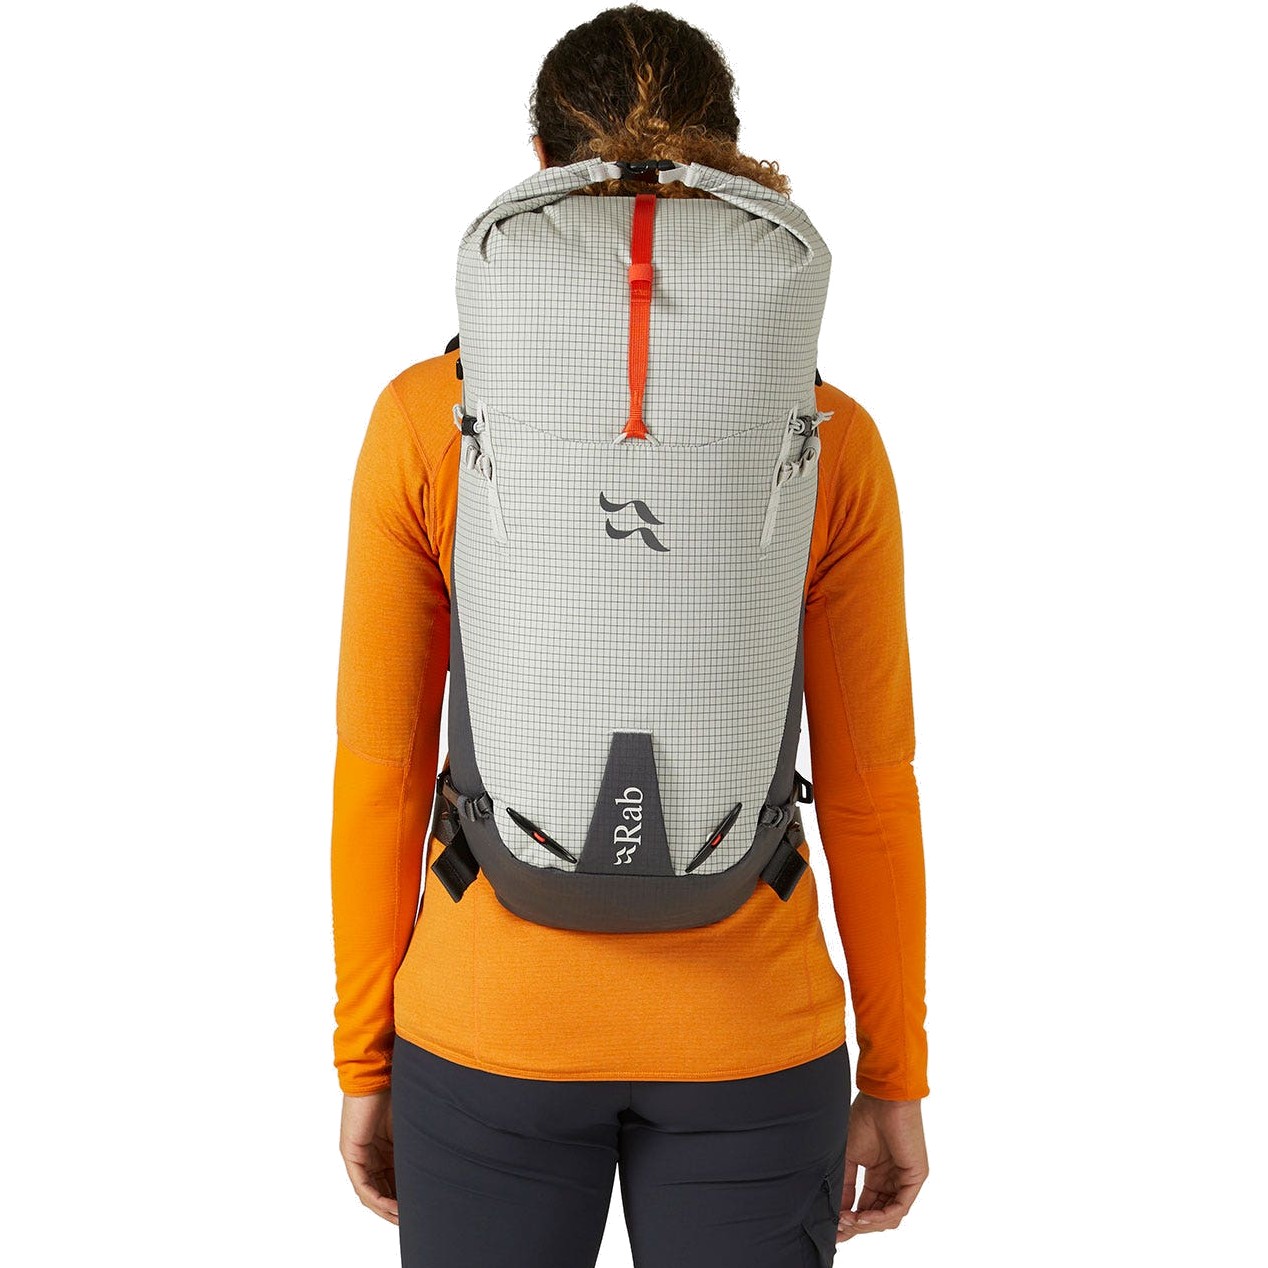 Photos - Backpack Rab Latok 28 Climbing/Mountaineering , 28L Pewter QAP-29-PEW-MED 